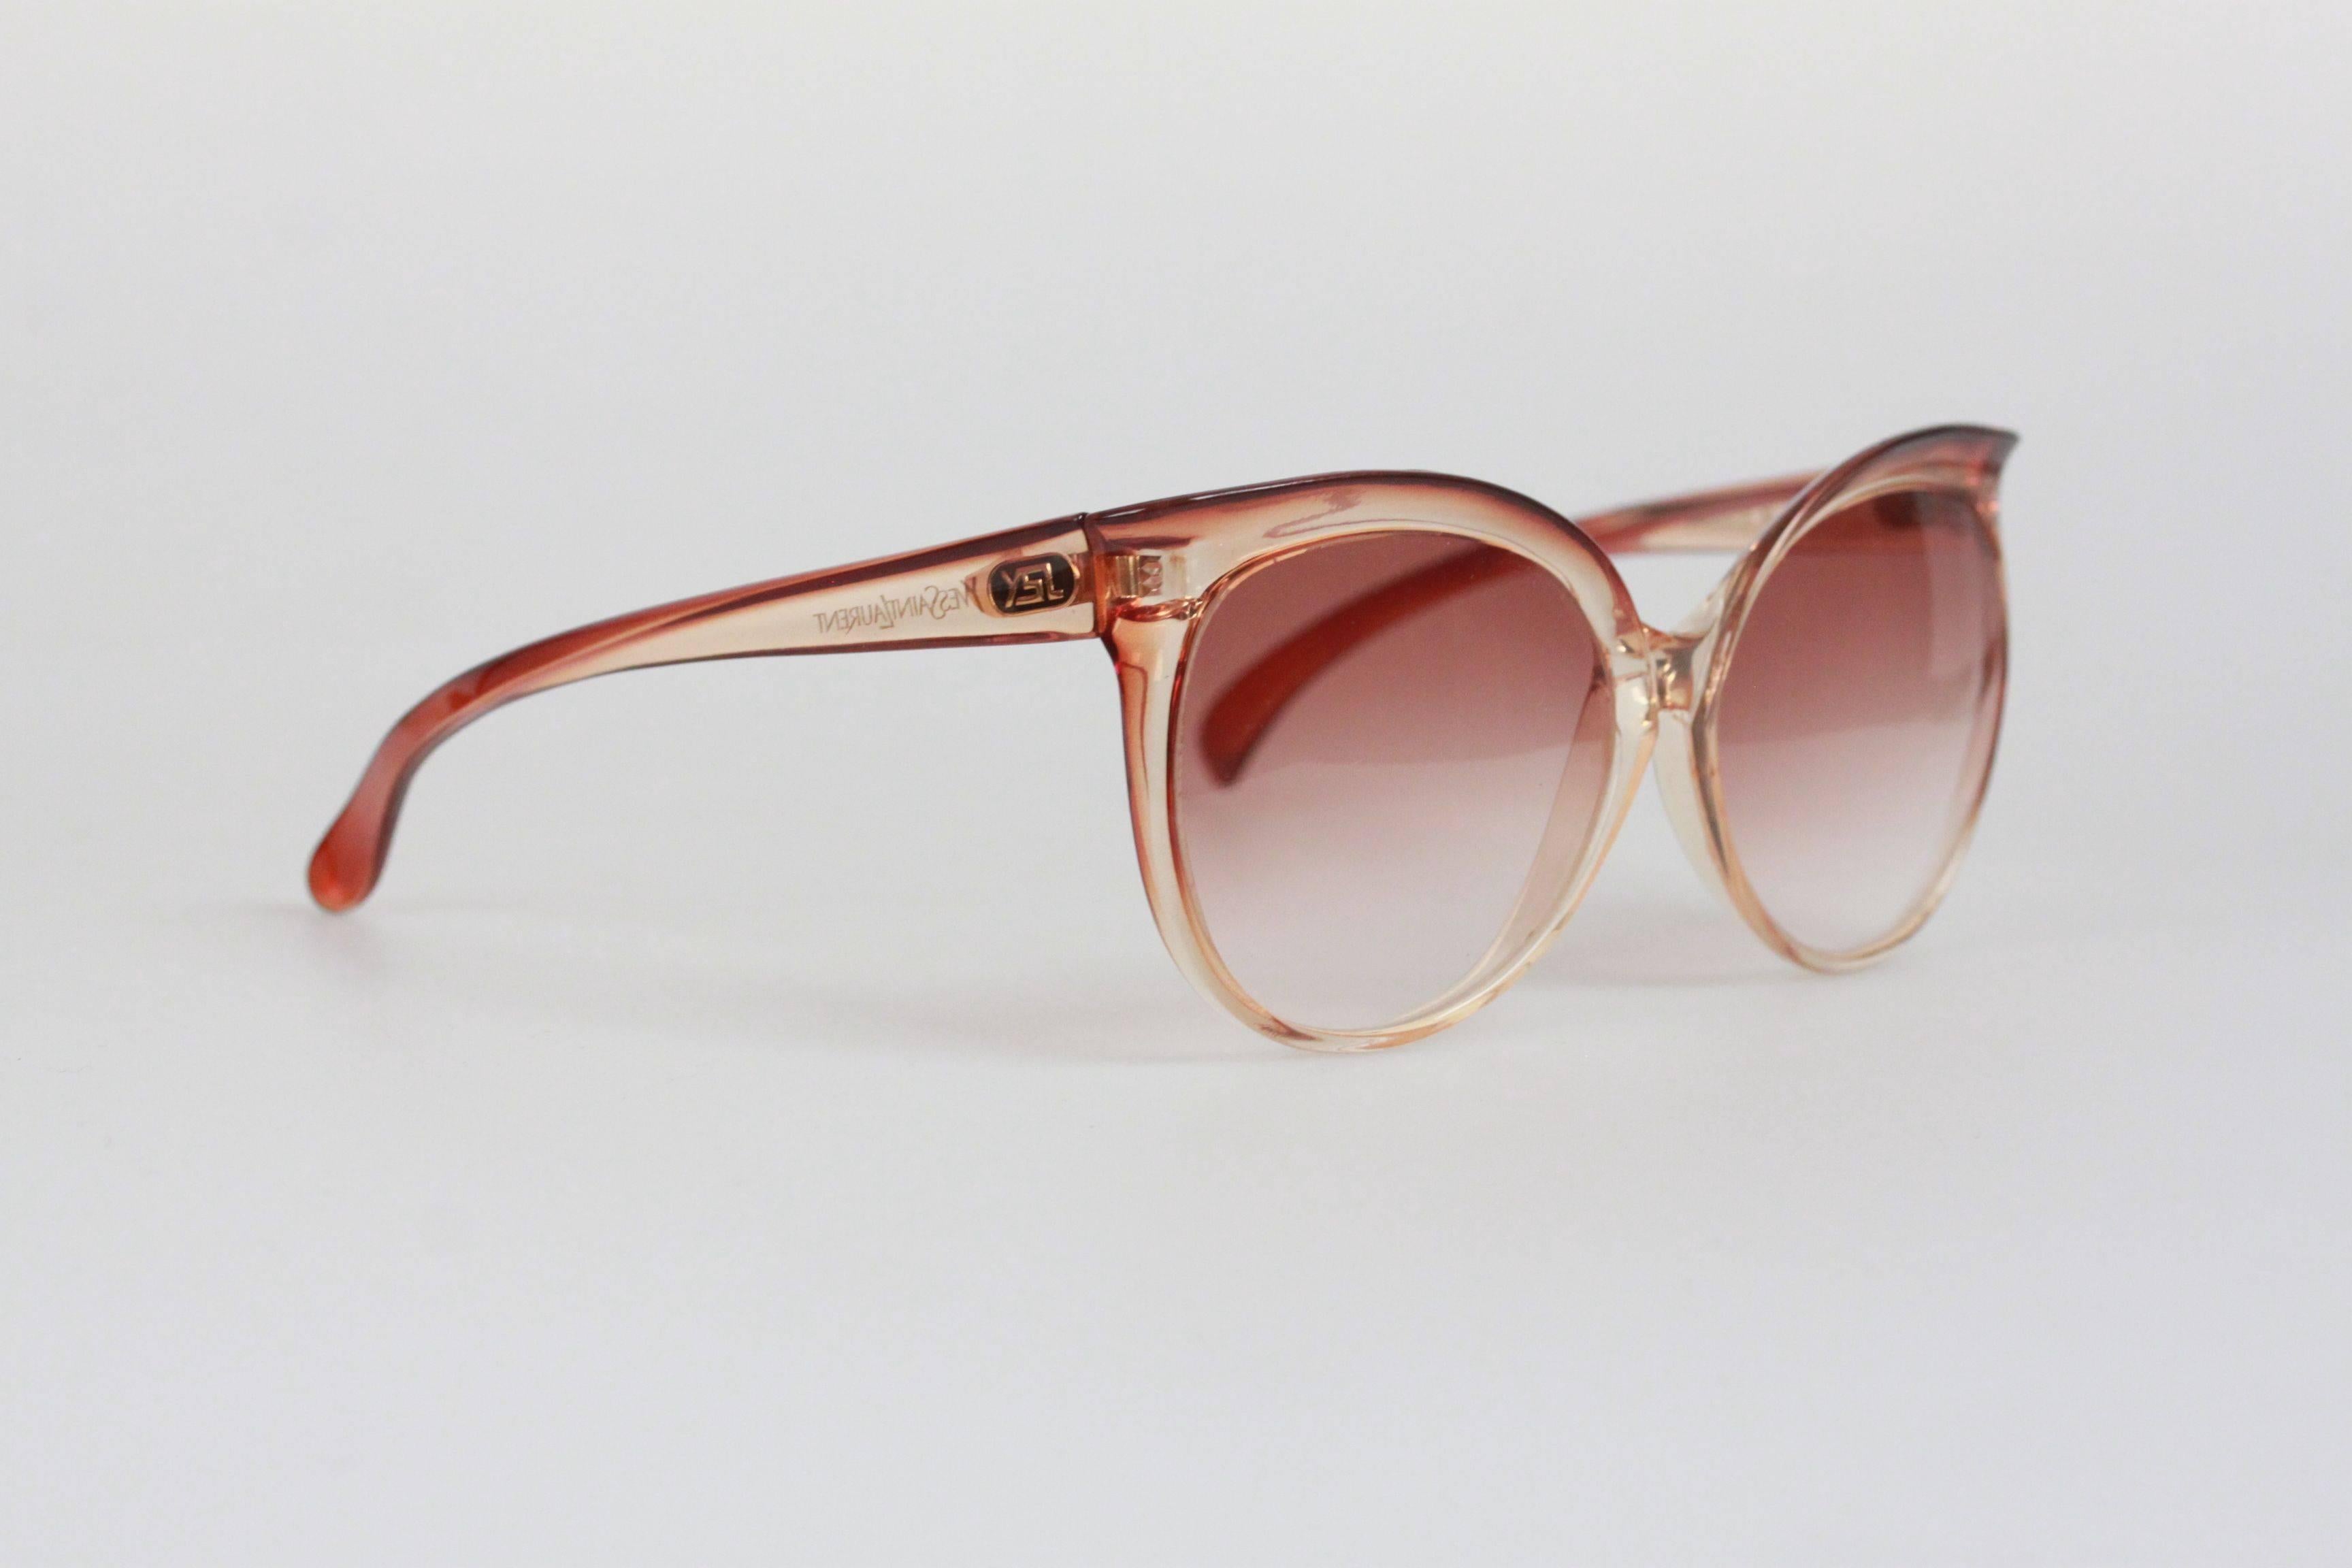 - Butterfly vintage sunglasses by YVES SAINT LAURENT from the 80s
- Mod. 8059 
- Clear Brown & Beige plastic frame 
- Gradient brown lens
- YVES SAINT LAURENT signature on temples
- Hand-Made in France

Any other detail which is not mentioned may be